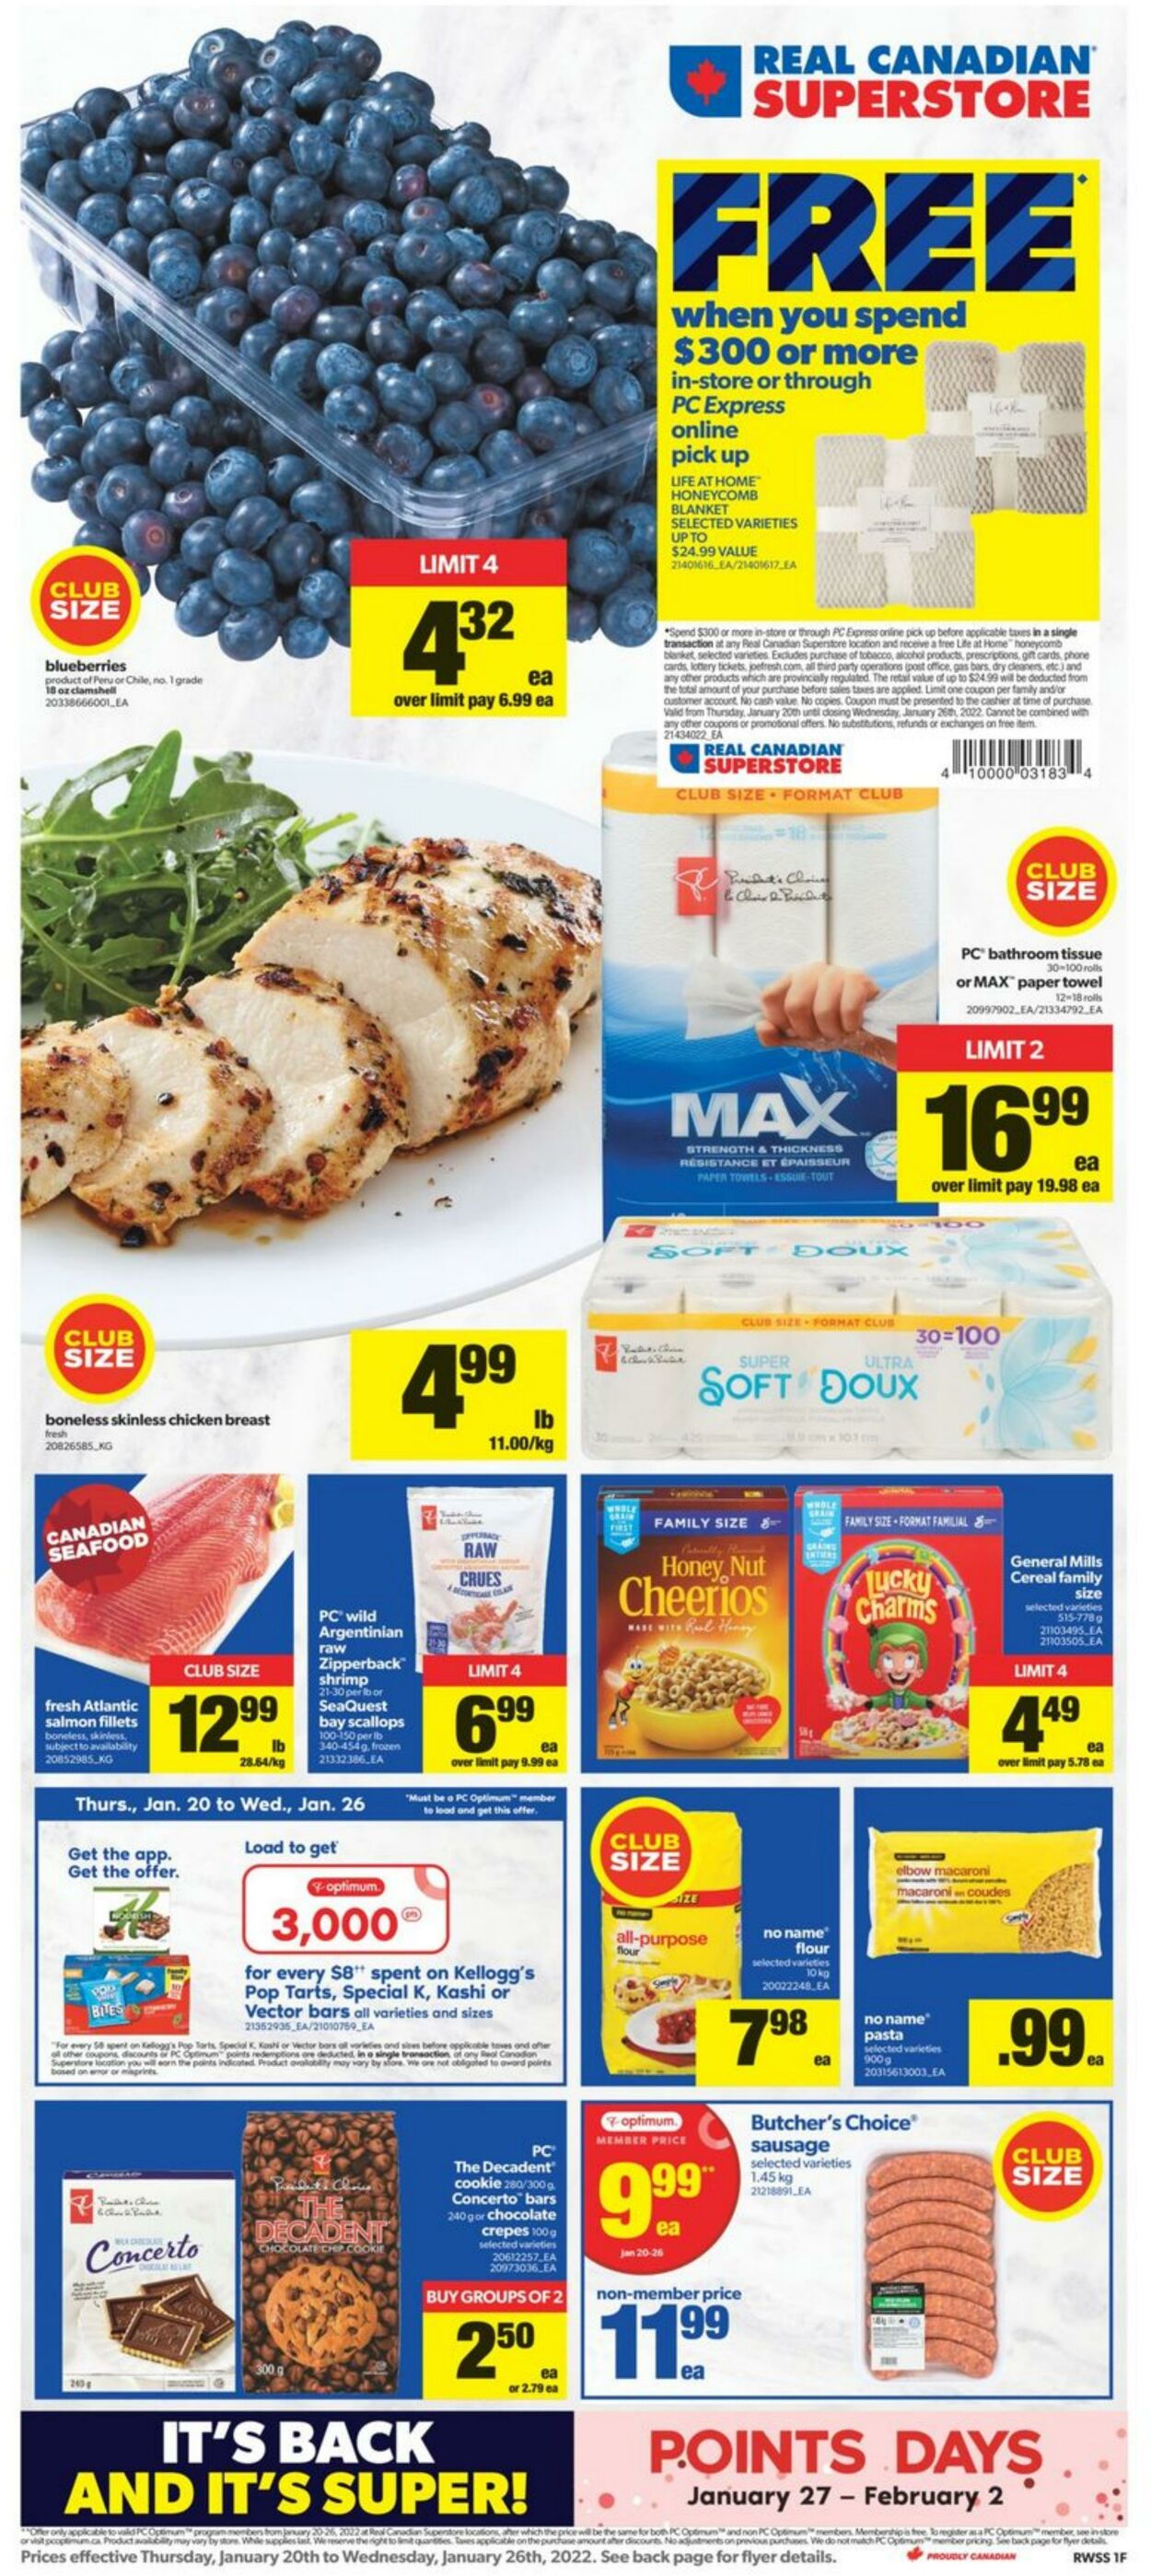 Flyer Real Canadian Superstore 20.01.2022-26.01.2022